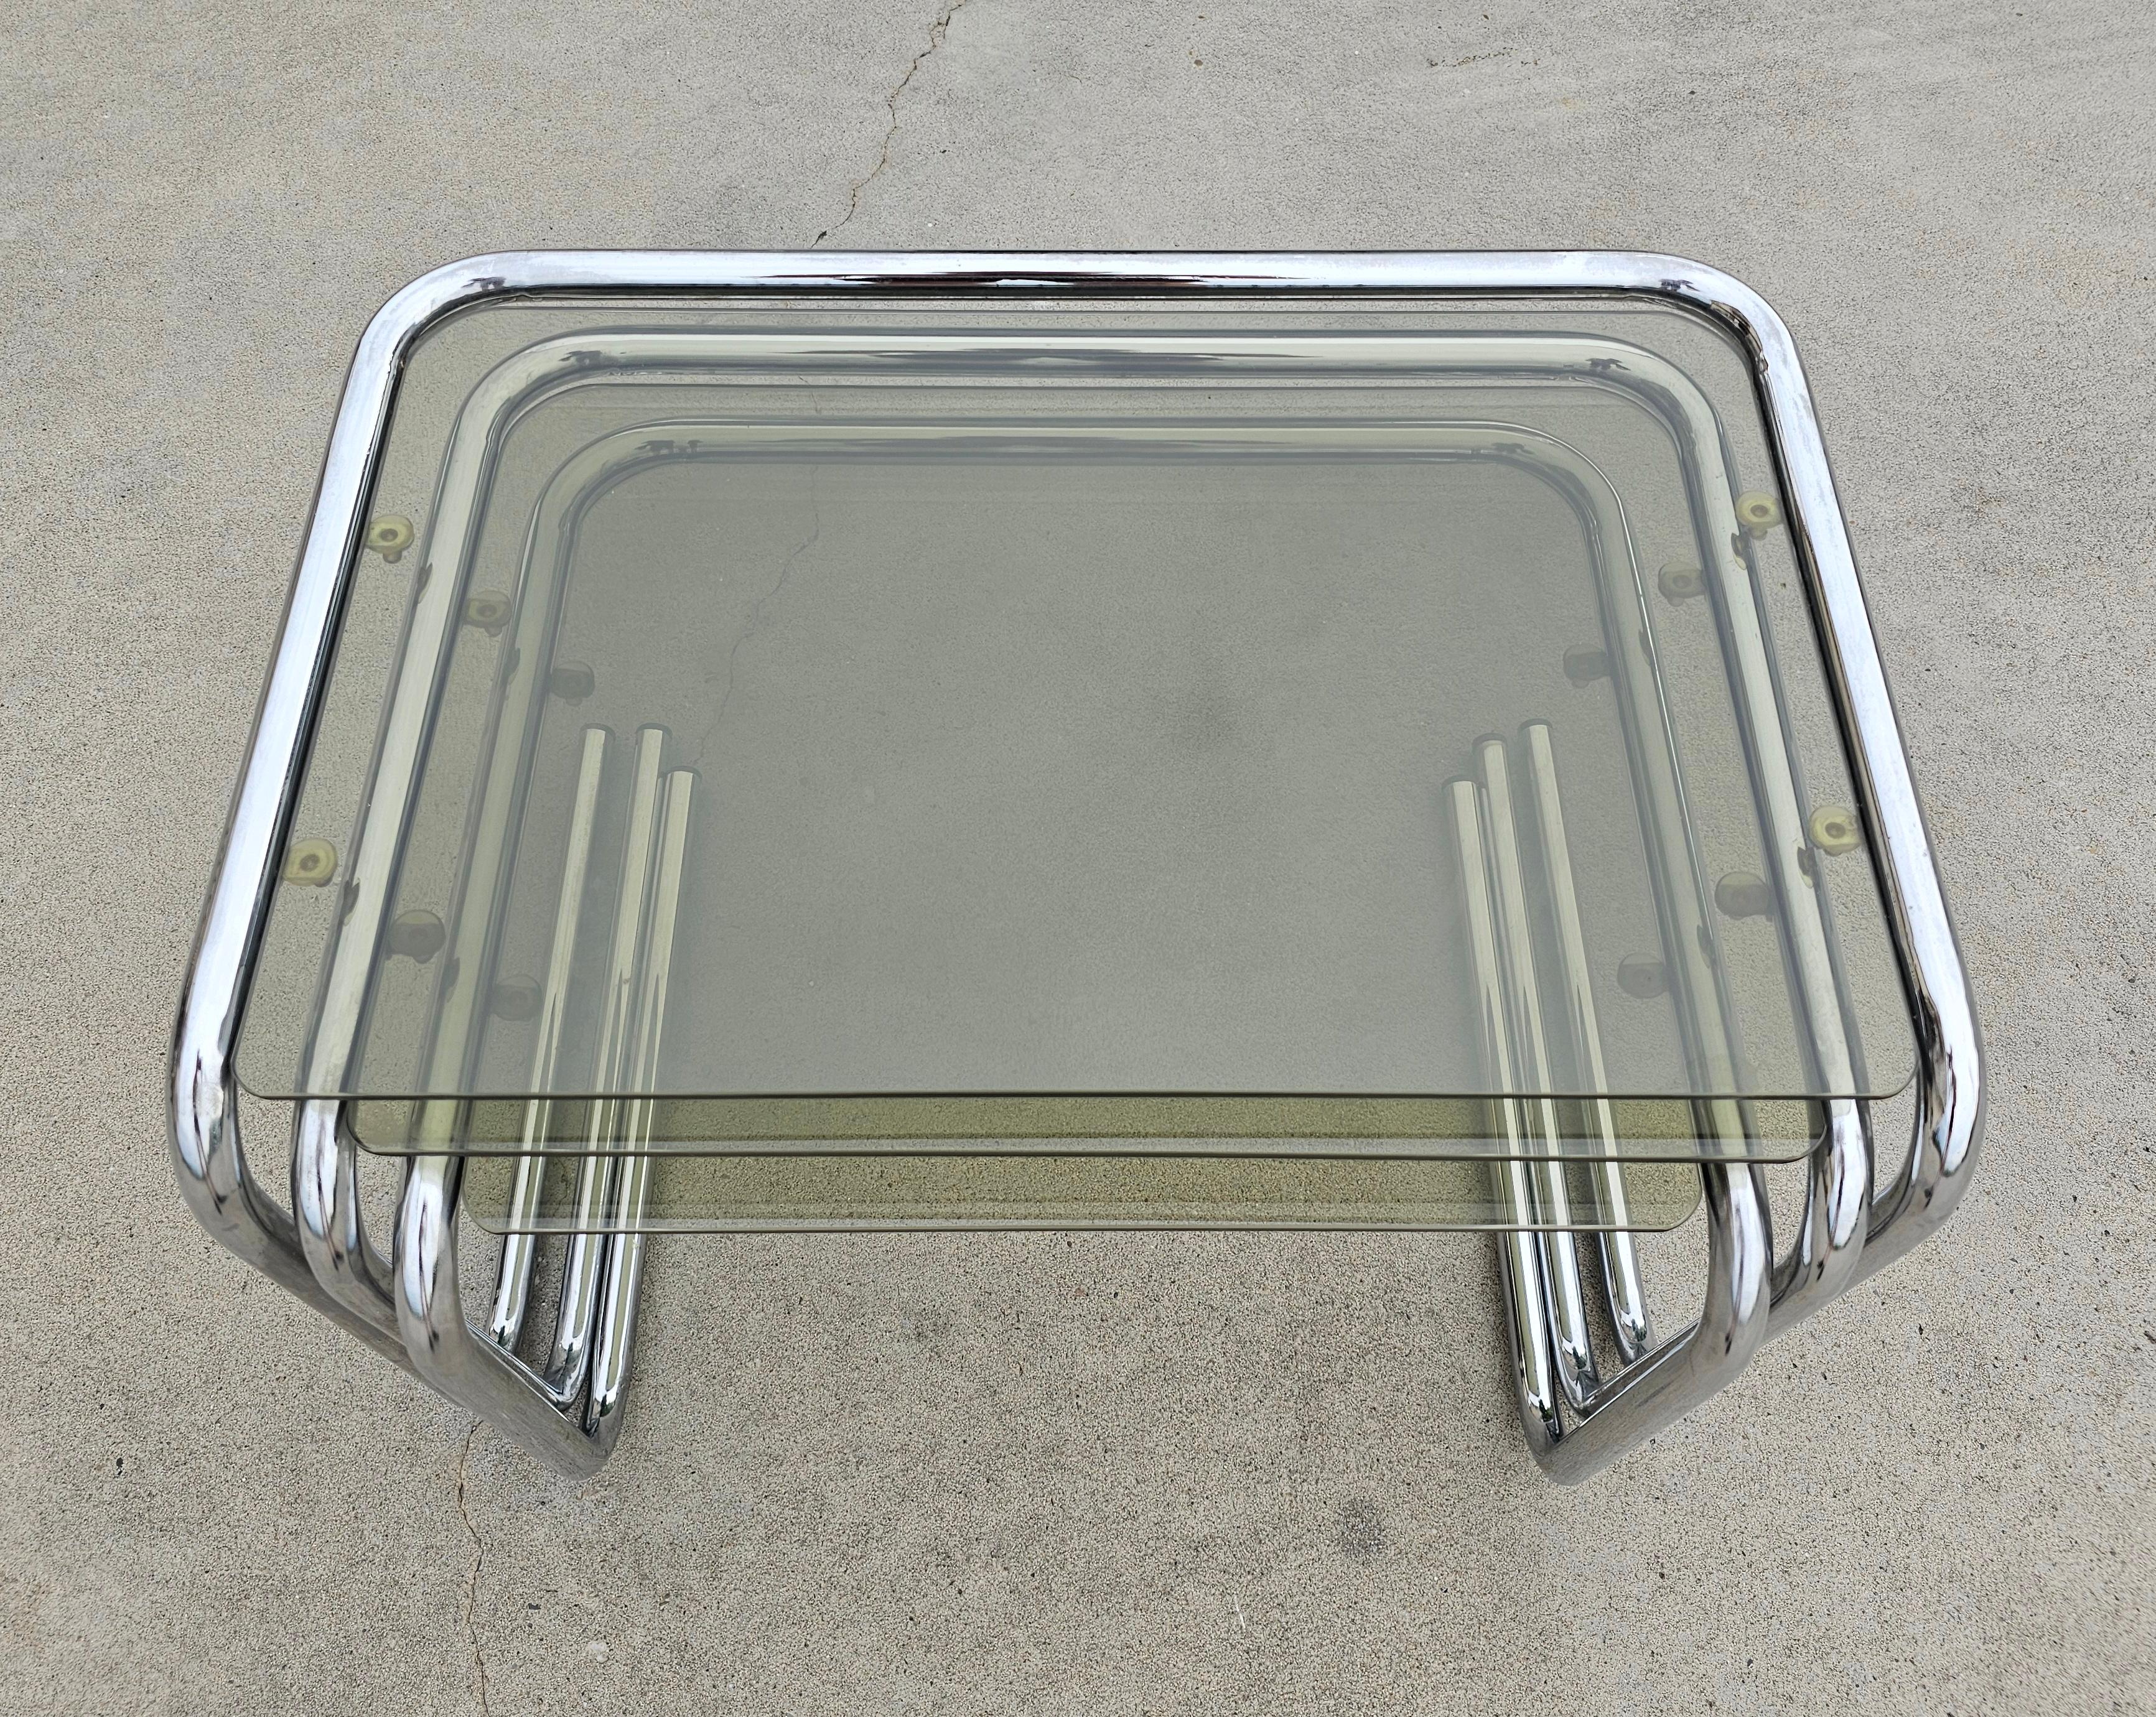 Milo Baughman style Chrome and Smoked Glass Nesting Tables, Italy 1970s For Sale 1